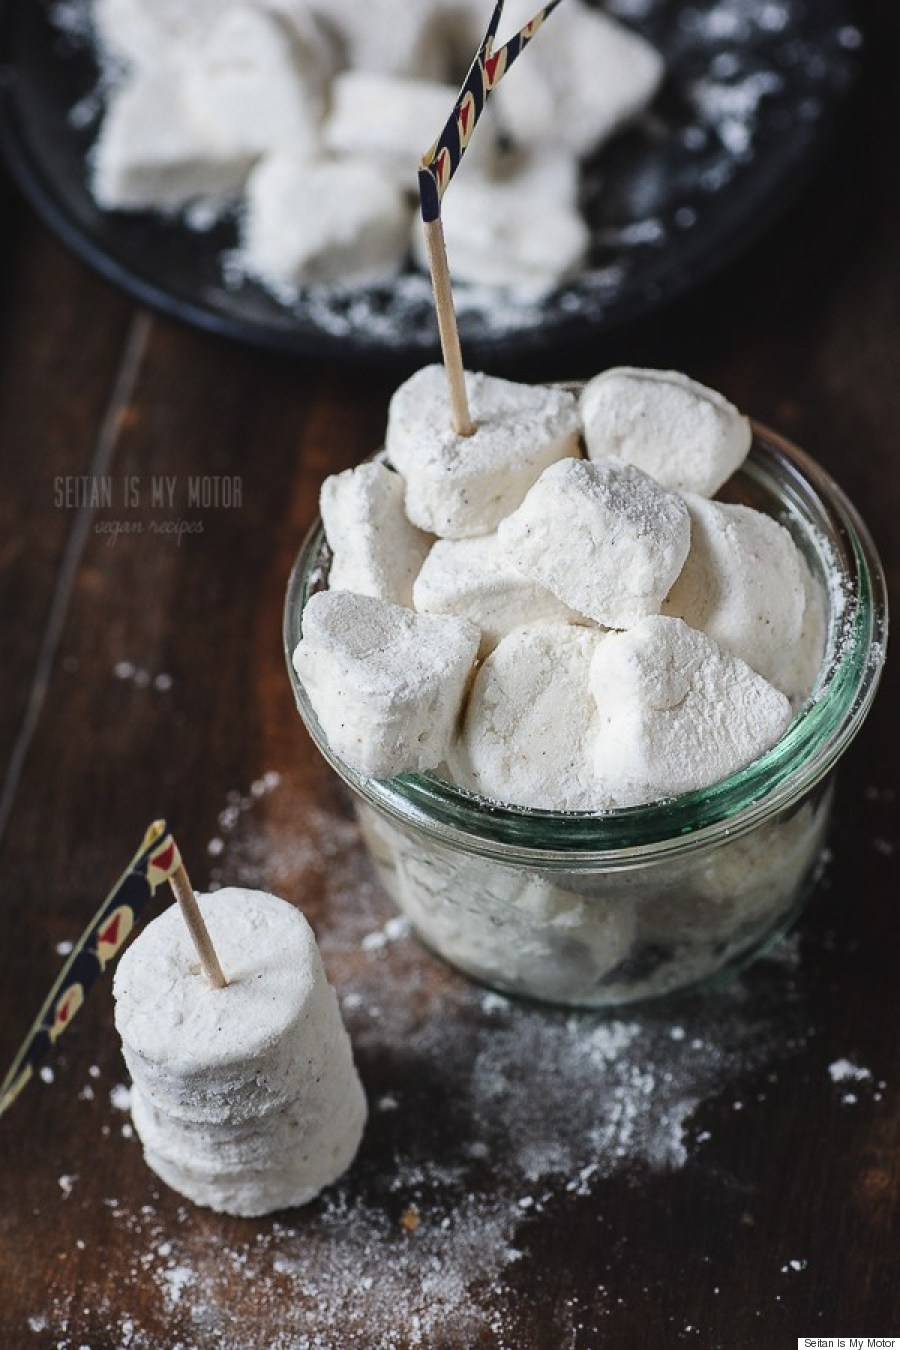 Awesome vegan Aquafaba Recipes Here are some awesome Aquafaba Recipes. We all heard of Aquafaba the chickpea water we can use from the canned chickpeas as an egg replacer .